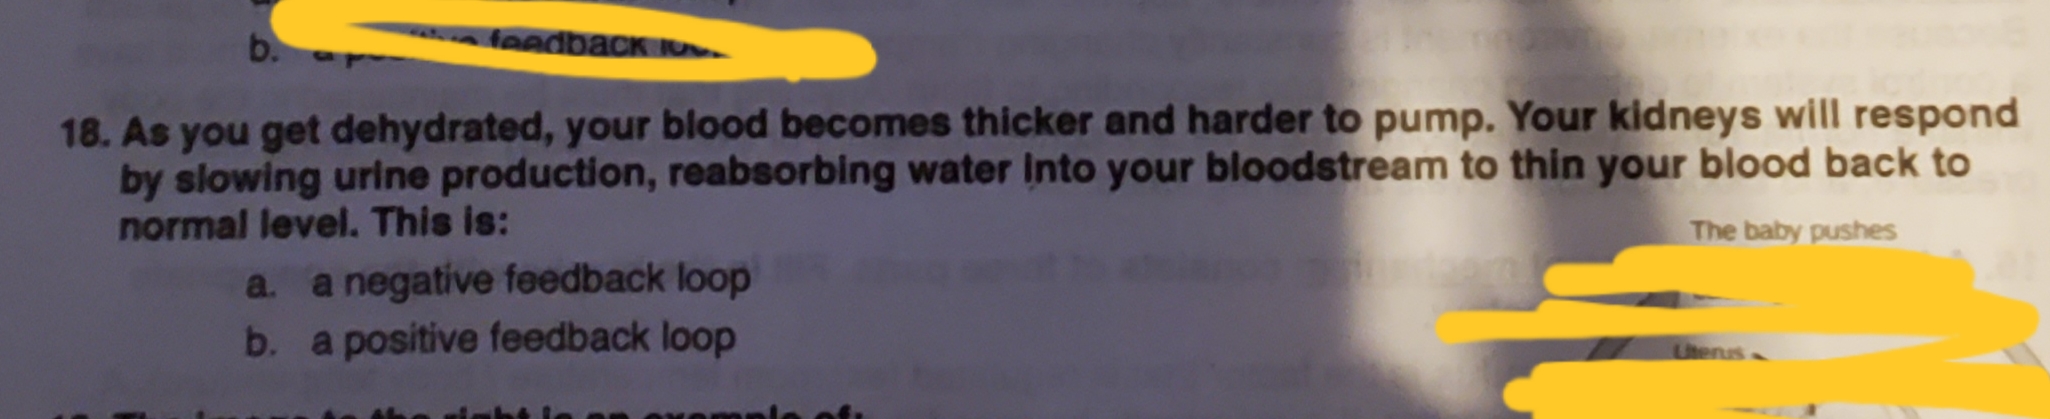 feedback
b.
18. As you get dehydrated, your blood becomes thicker and harder to pump. Your kidneys will respond
by slowing urine production, reabsorbing water Into your bloodstream to thin your blood back to
normal level. This is:
The baby pushes
a. a negative feedback loop
b. a positive feedback loop
Uhenus
